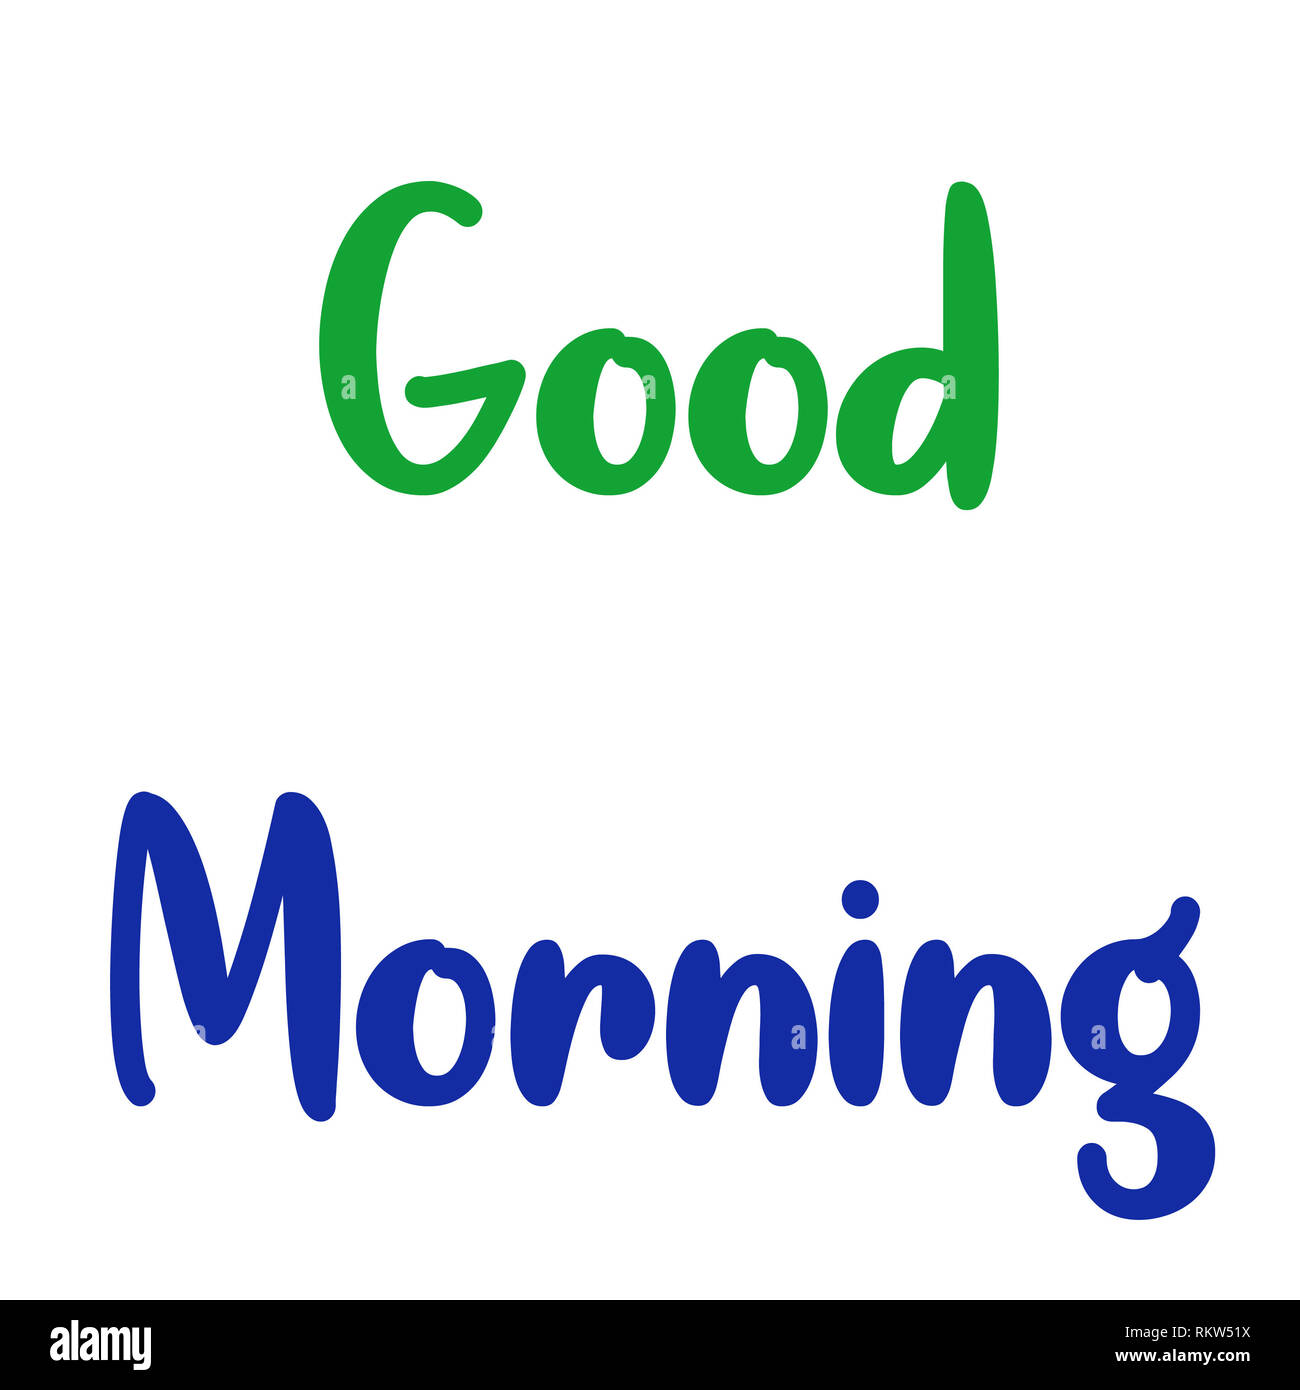 Good morning wishes and greetings Stock Photo - Alamy